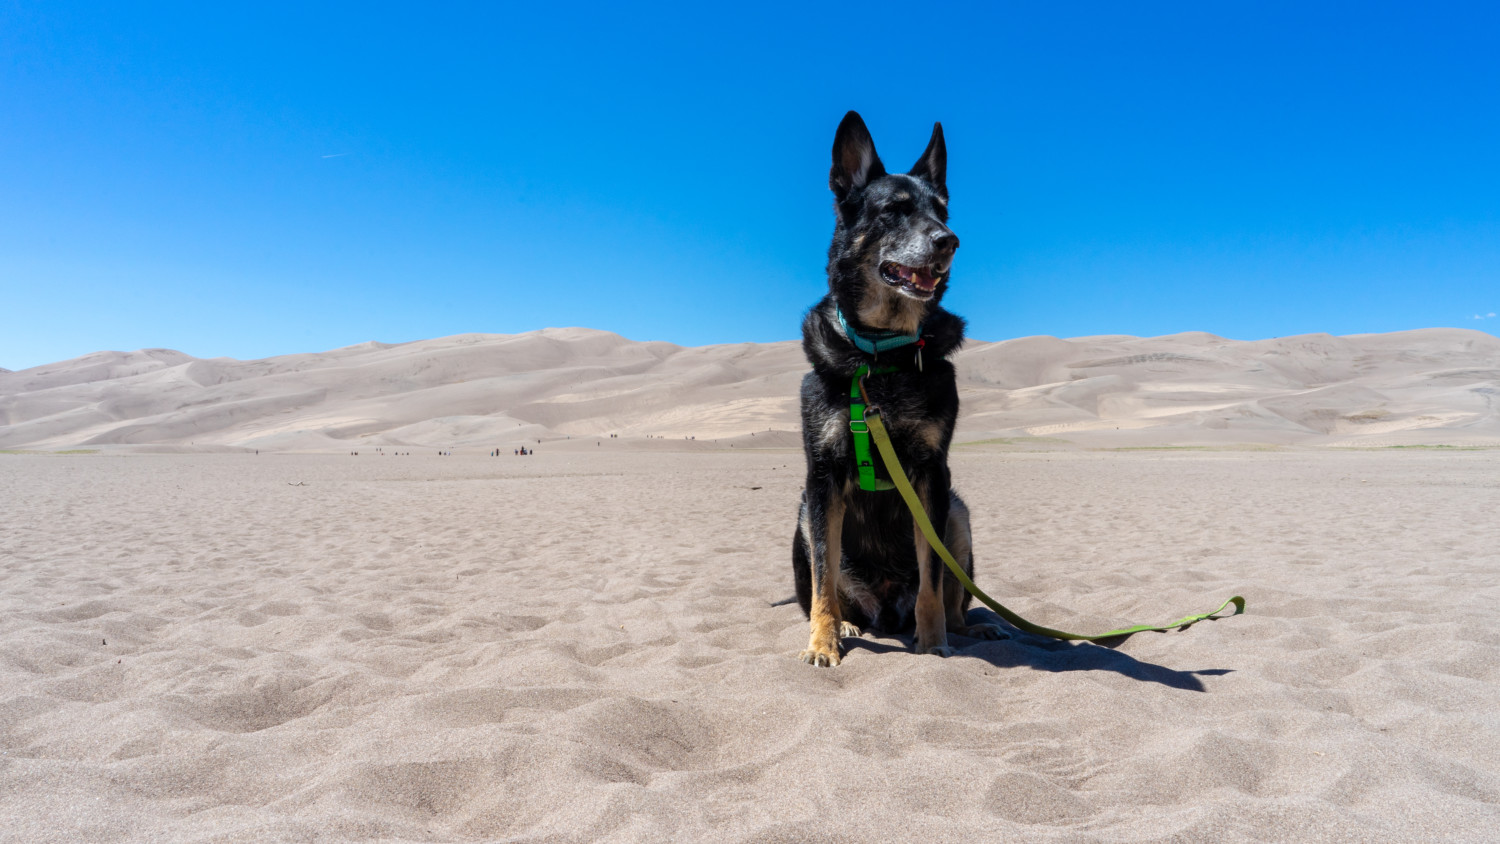 Buster the German Shepherd at pet friendly Great Sand Dunes National Park in Colorado